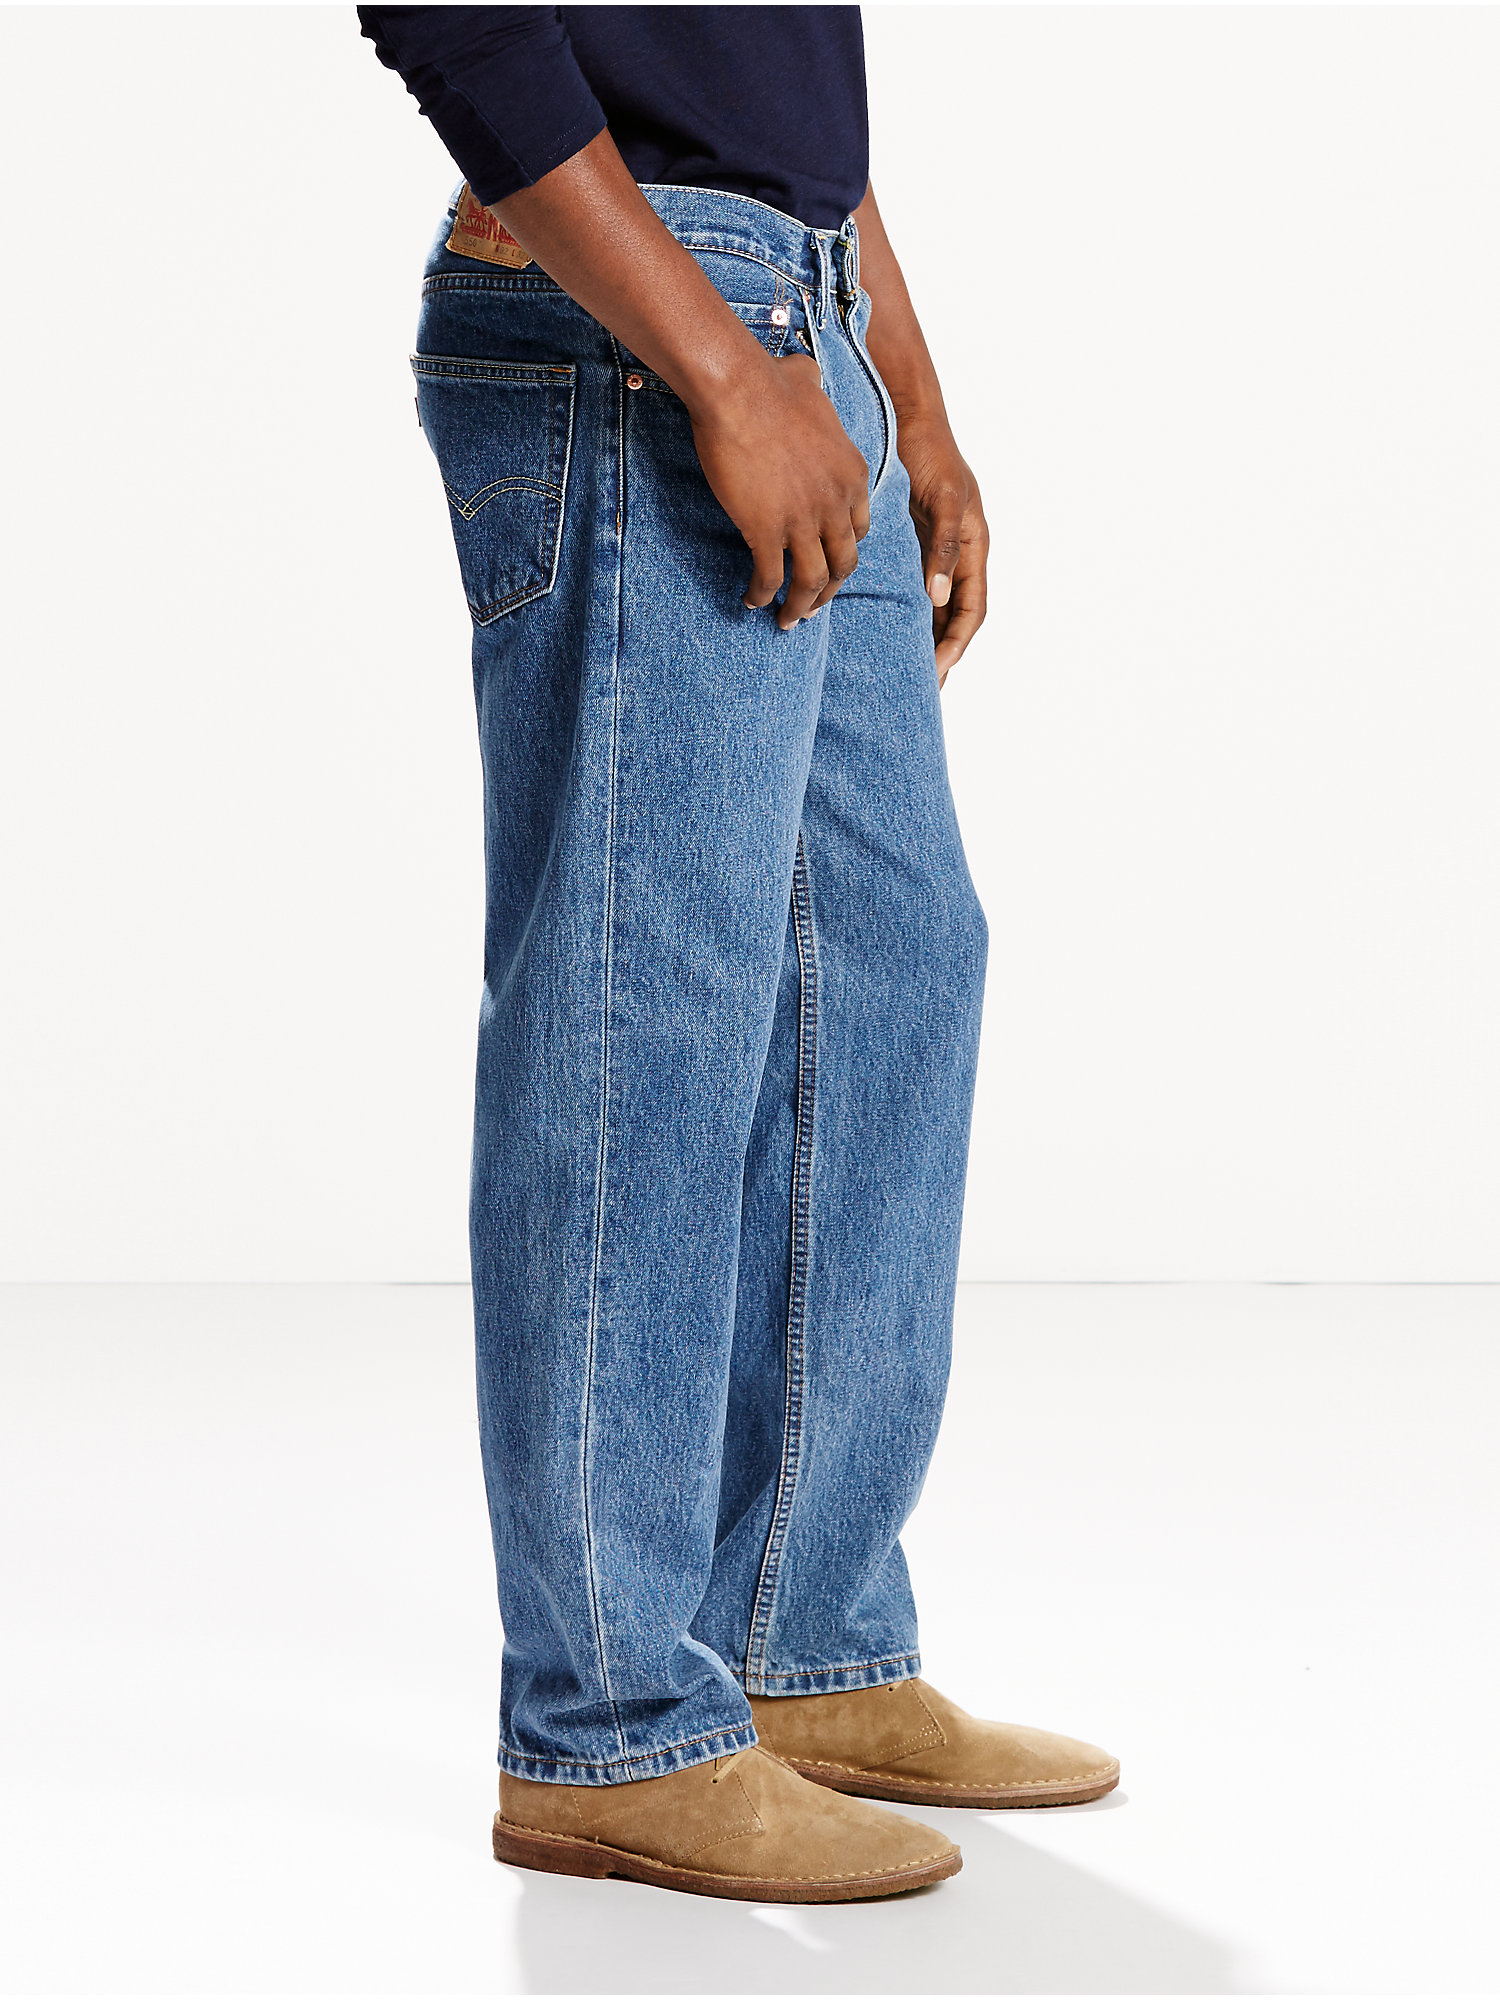 Levi's Men's Big & Tall 550 Relaxed Fit Jeans - image 5 of 7